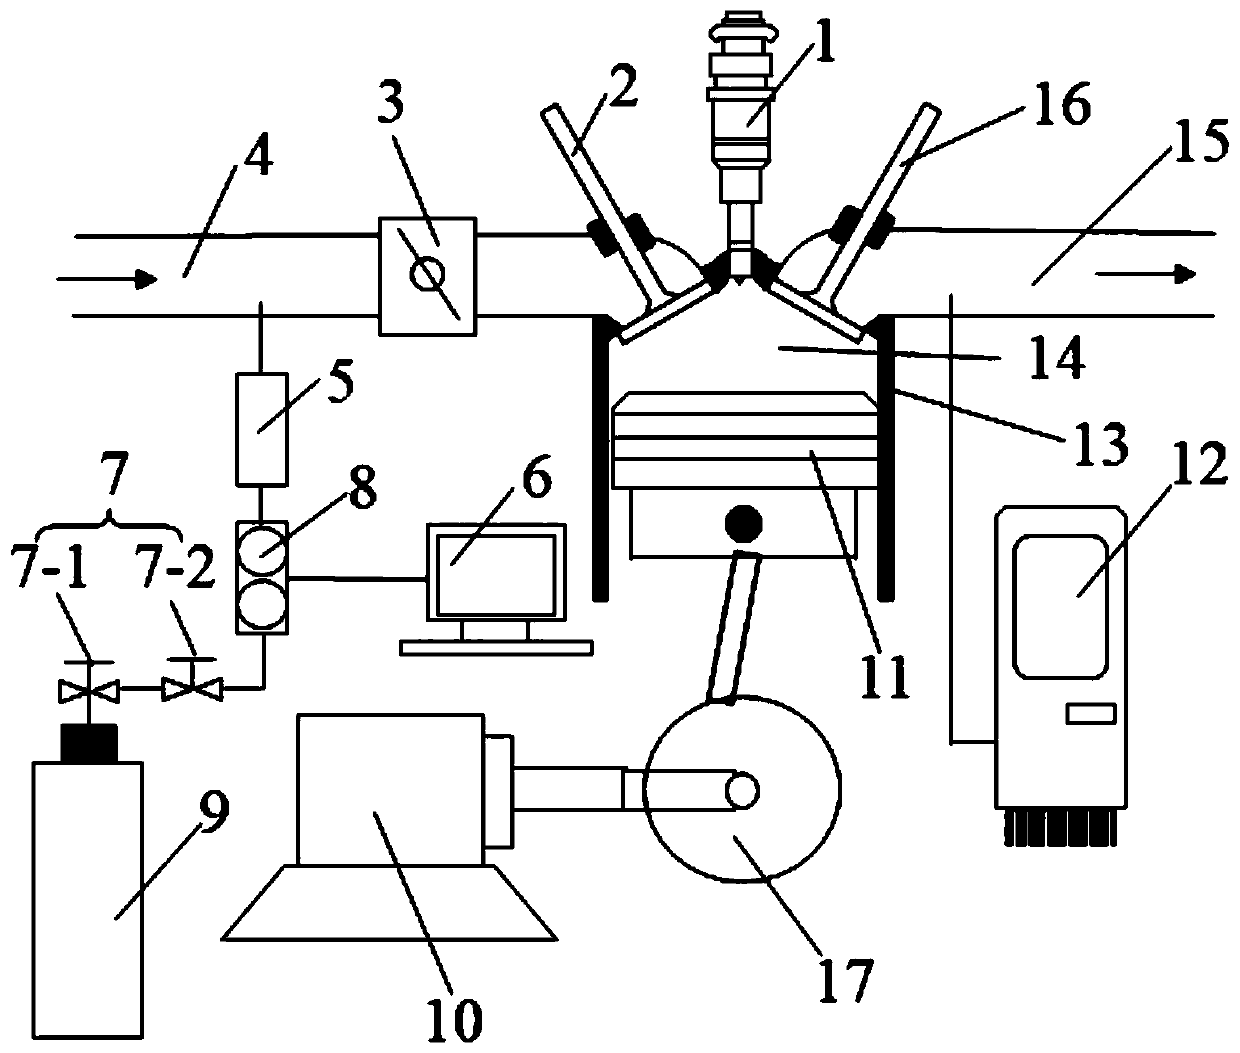 Test system and method for capture rate and scavenging efficiency of two-stroke engine